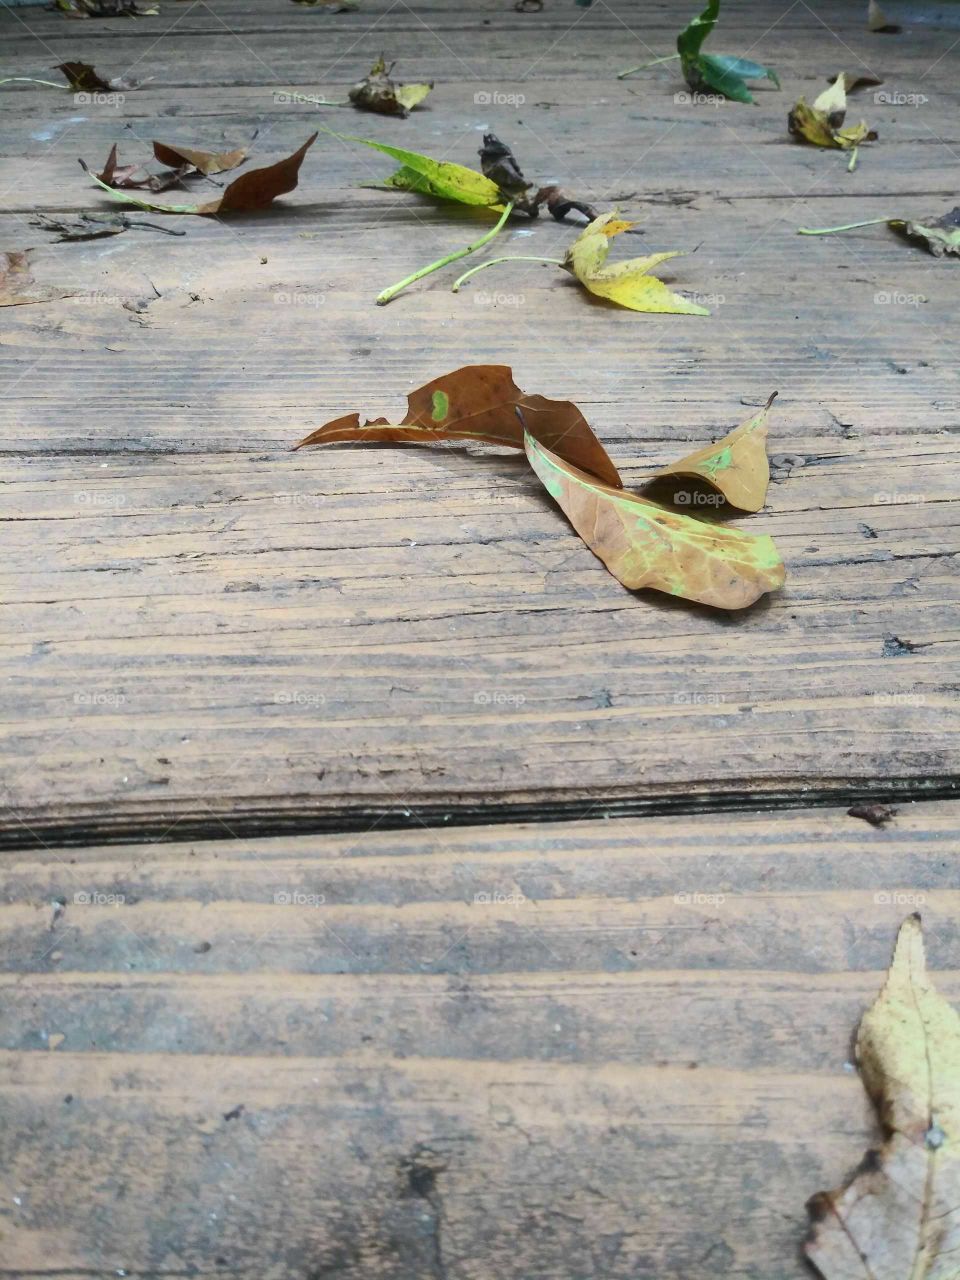 First of the fallen leaves